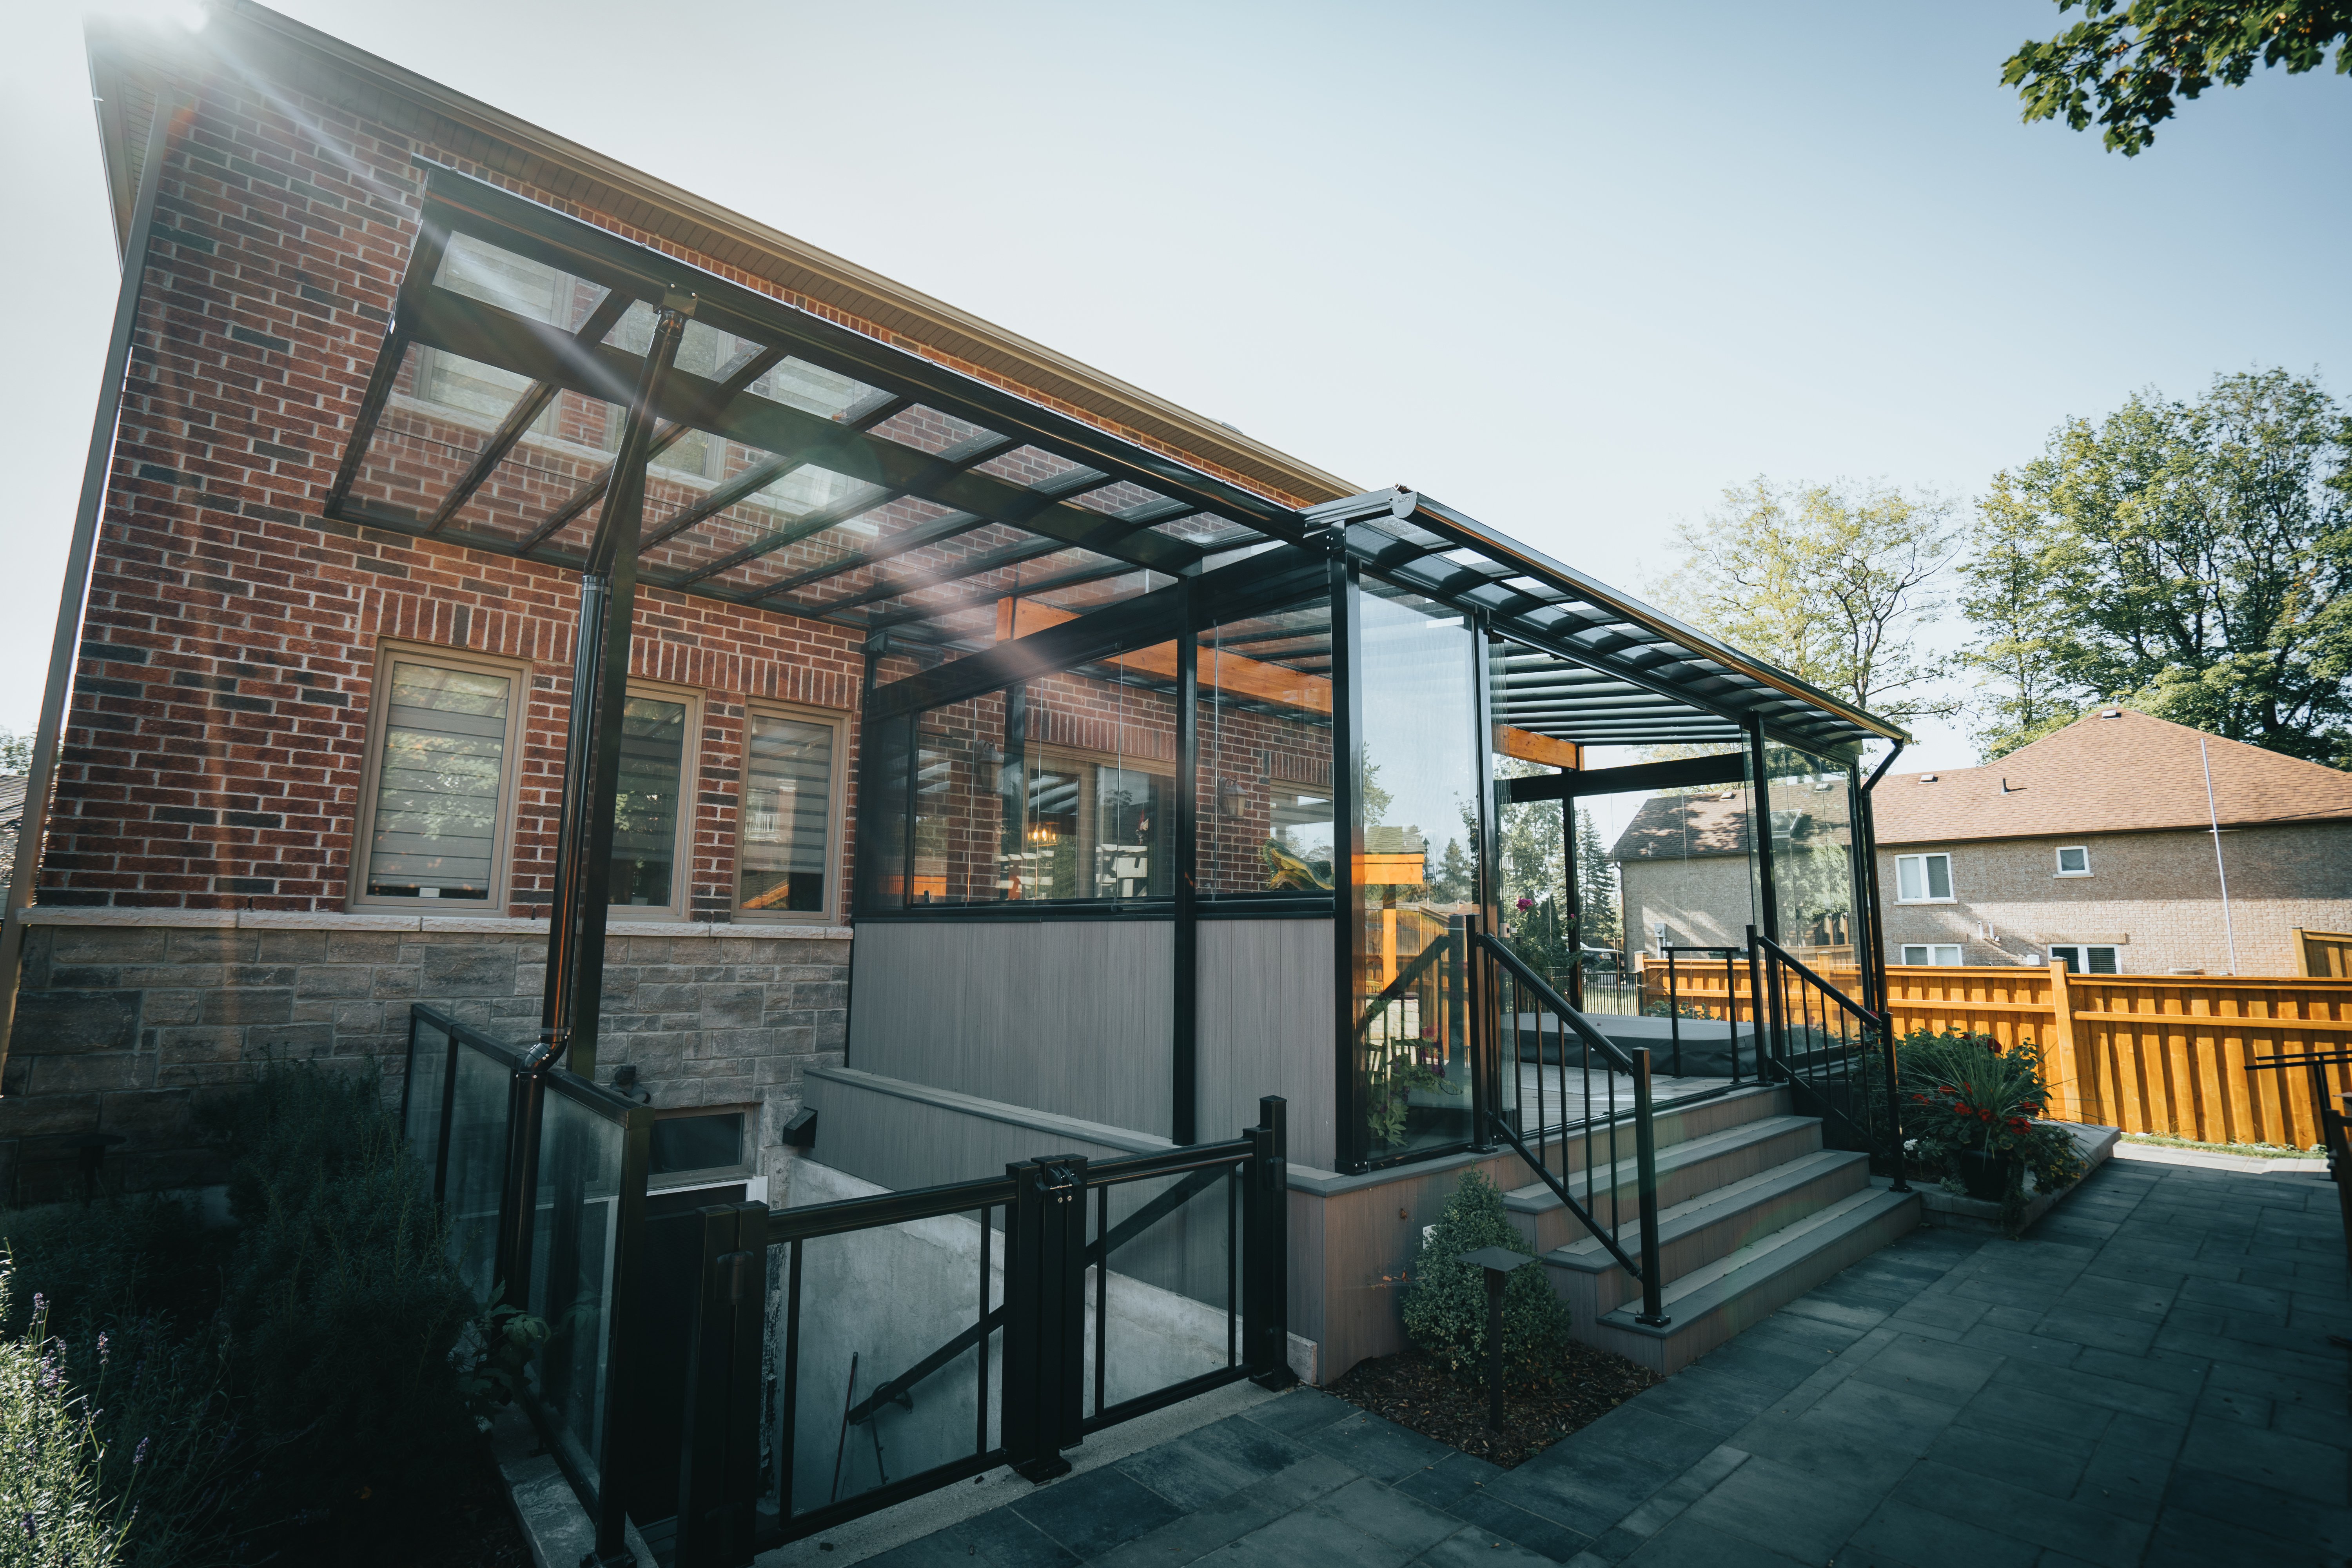 A sunroom with a black aluminum frame at the back of a brick house